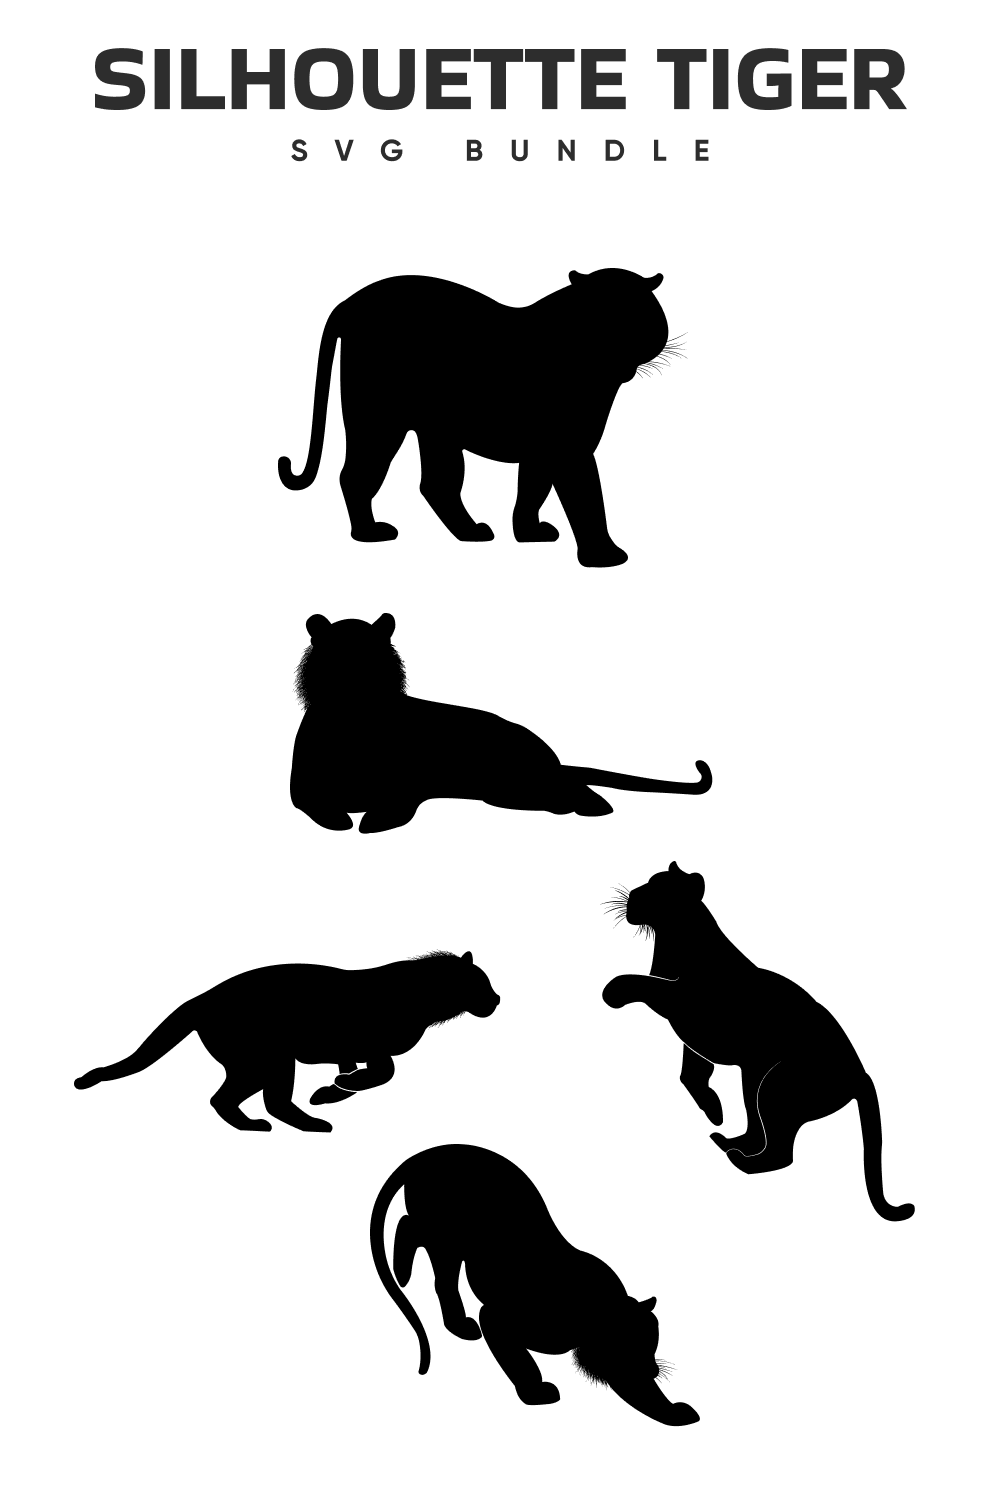 The silhouettes of different animals are shown in black and white.